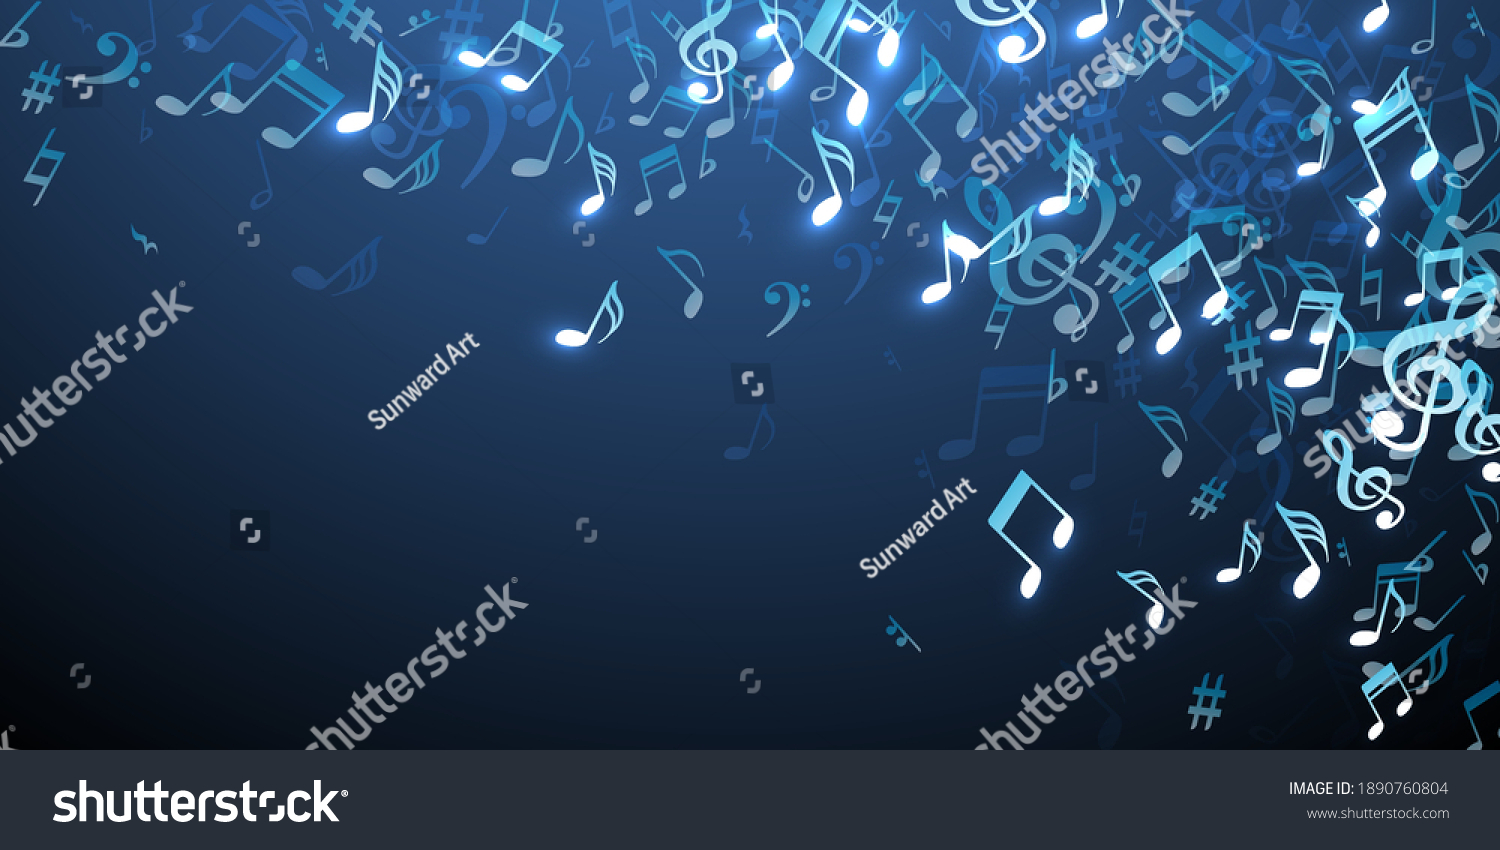 Music Note Icons Vector Illustration Symphony Stock Vector (Royalty ...